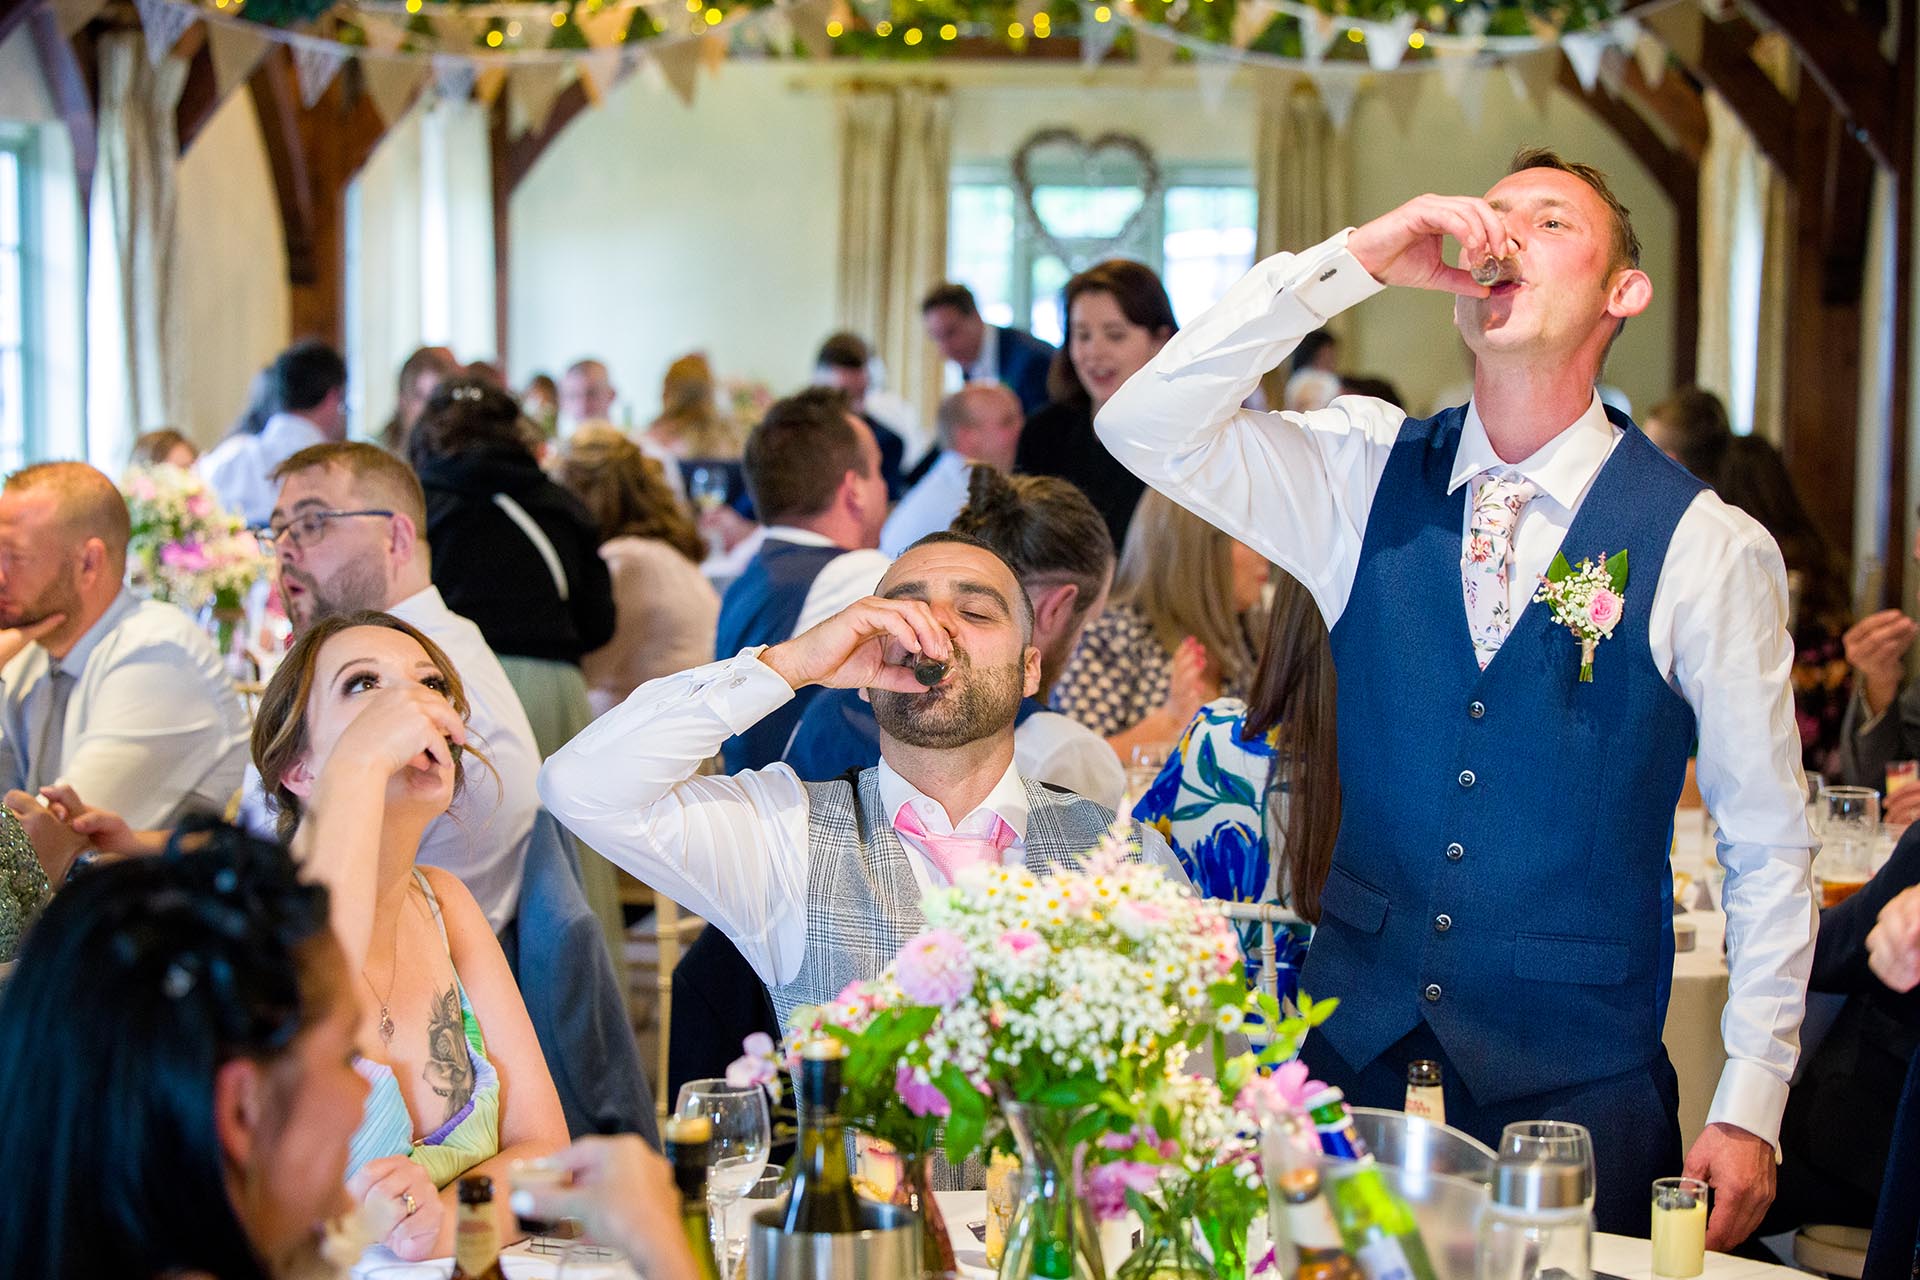 Essex reportage wedding photography at The Compasses at Pattiswick